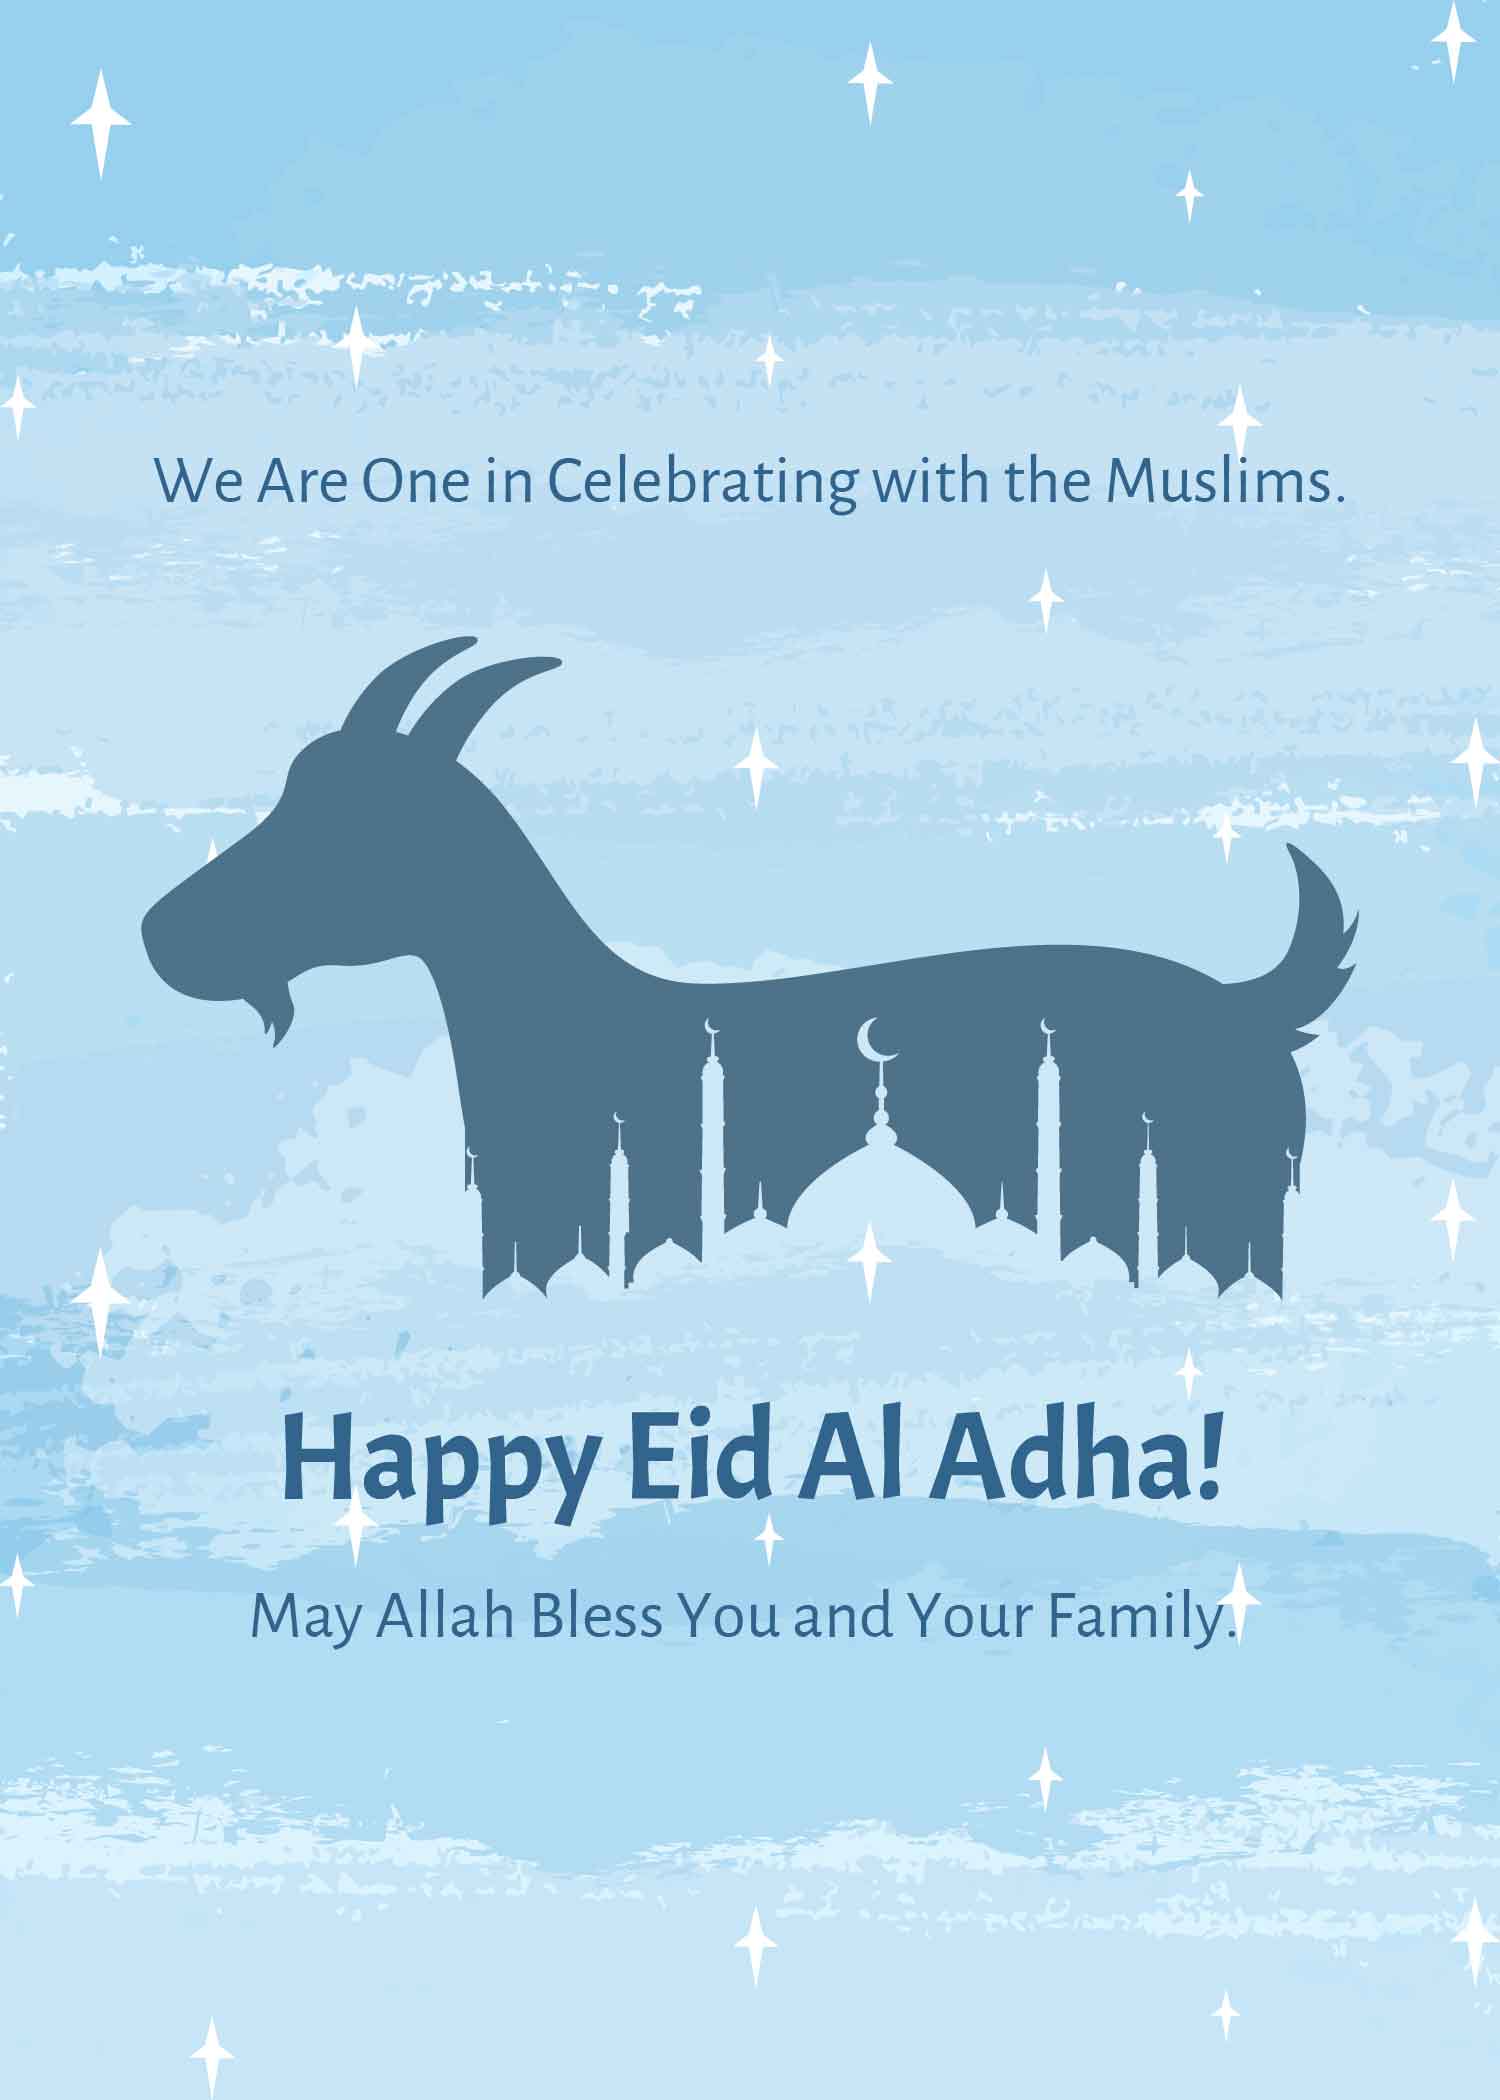 Free Watercolor Eid Al Adha Card in Word, Google Docs, Illustrator, PSD, Apple Pages, Publisher